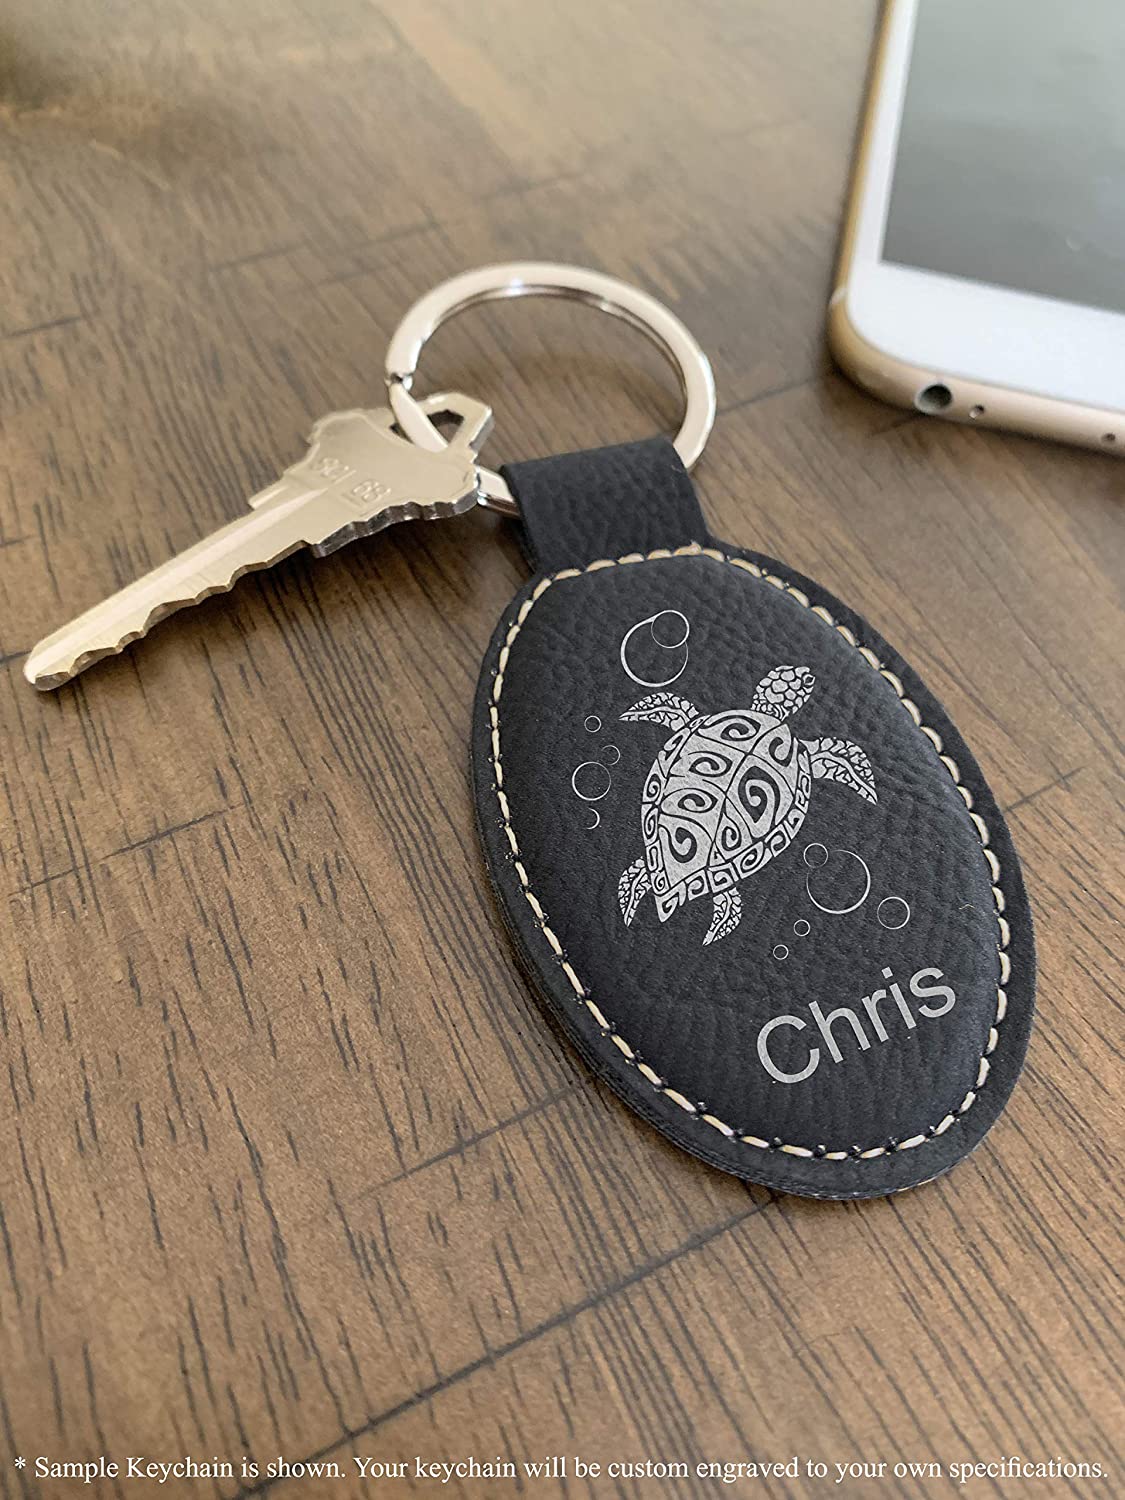 Faux Leather Oval Keychain, Emergency Dispatcher 911, Personalized Engraving Included